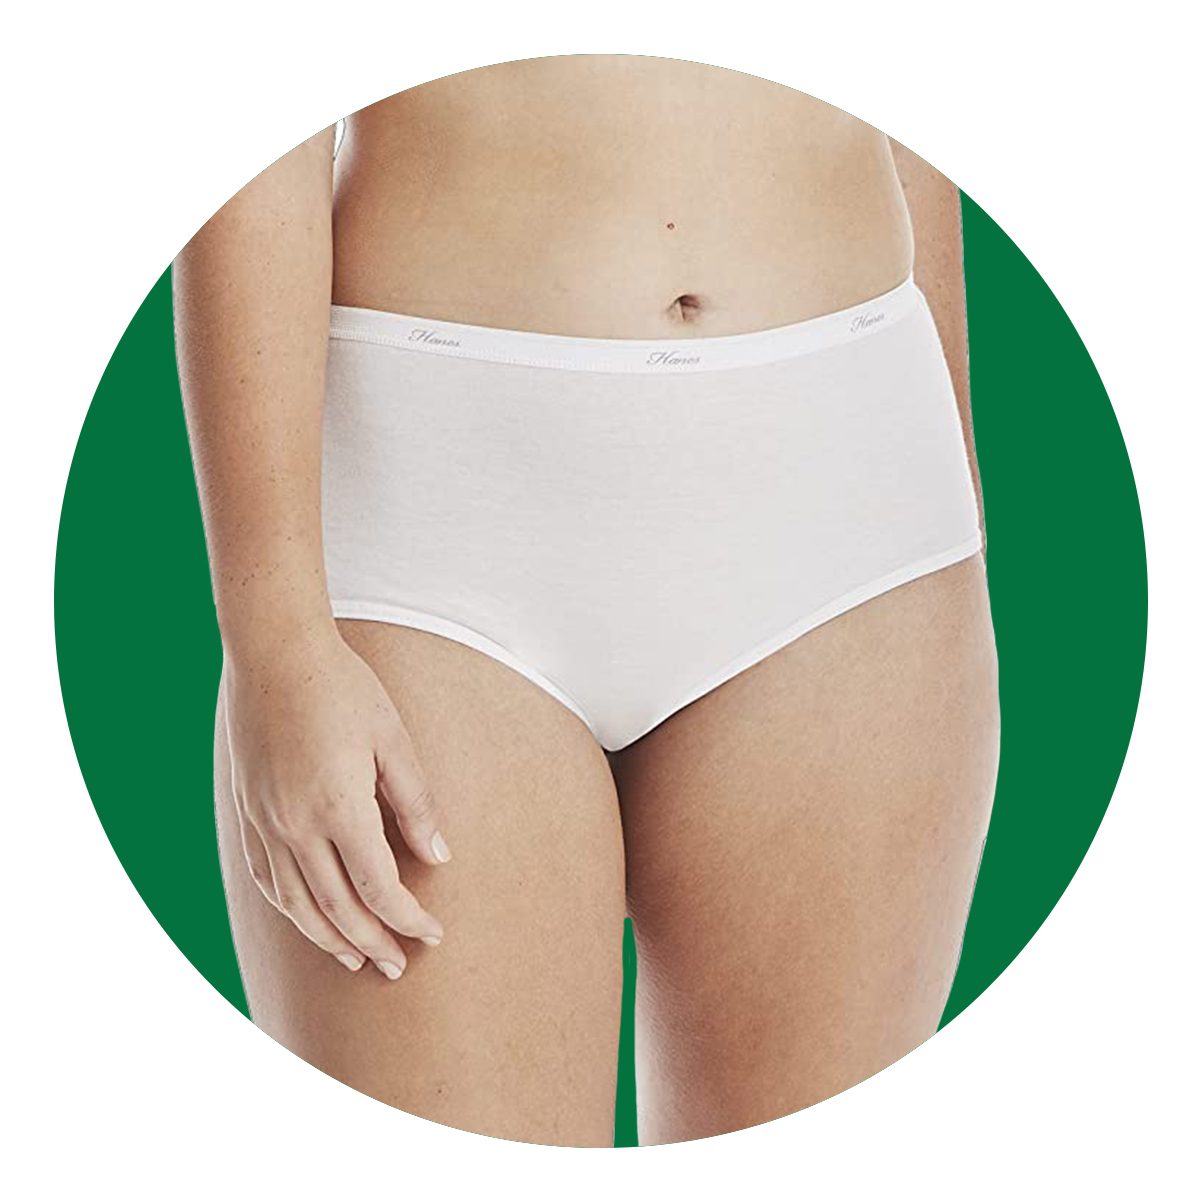 The Most Breathable Women's Underwear, According to OB-GYNs